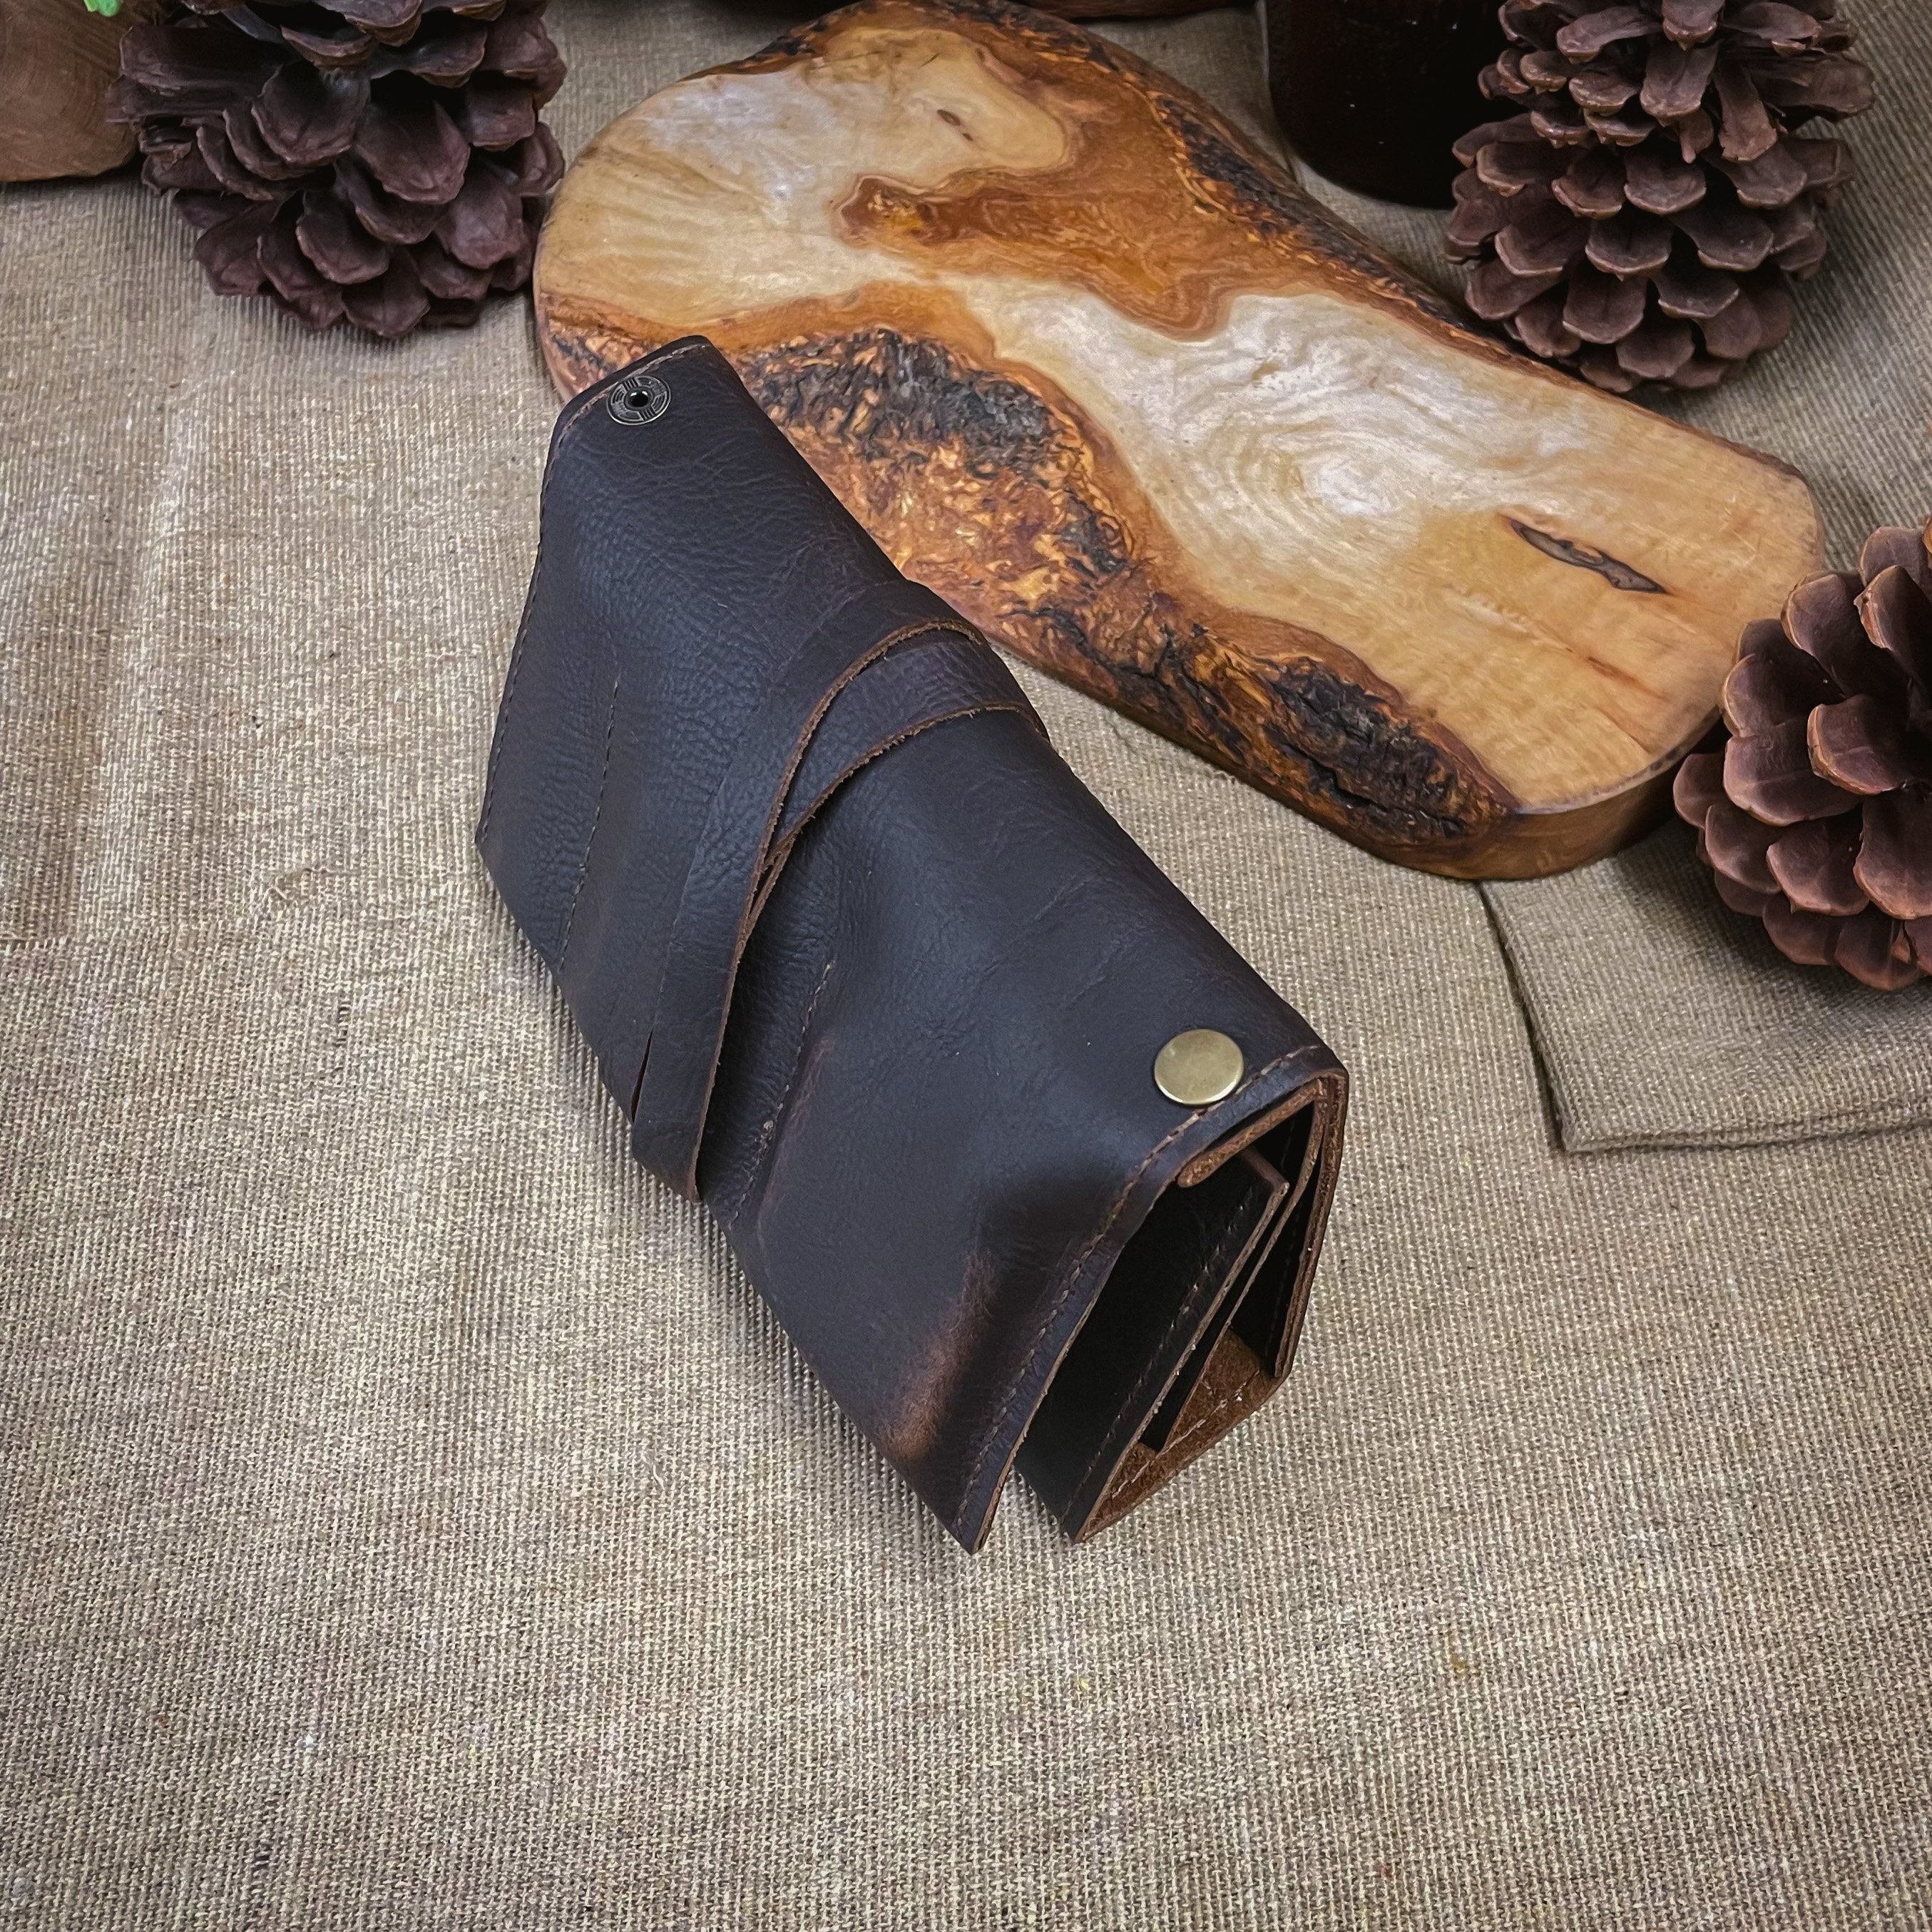 Rustic Kodiak Leather - Large Tobacco Pipe Pouch / Pipe Roll